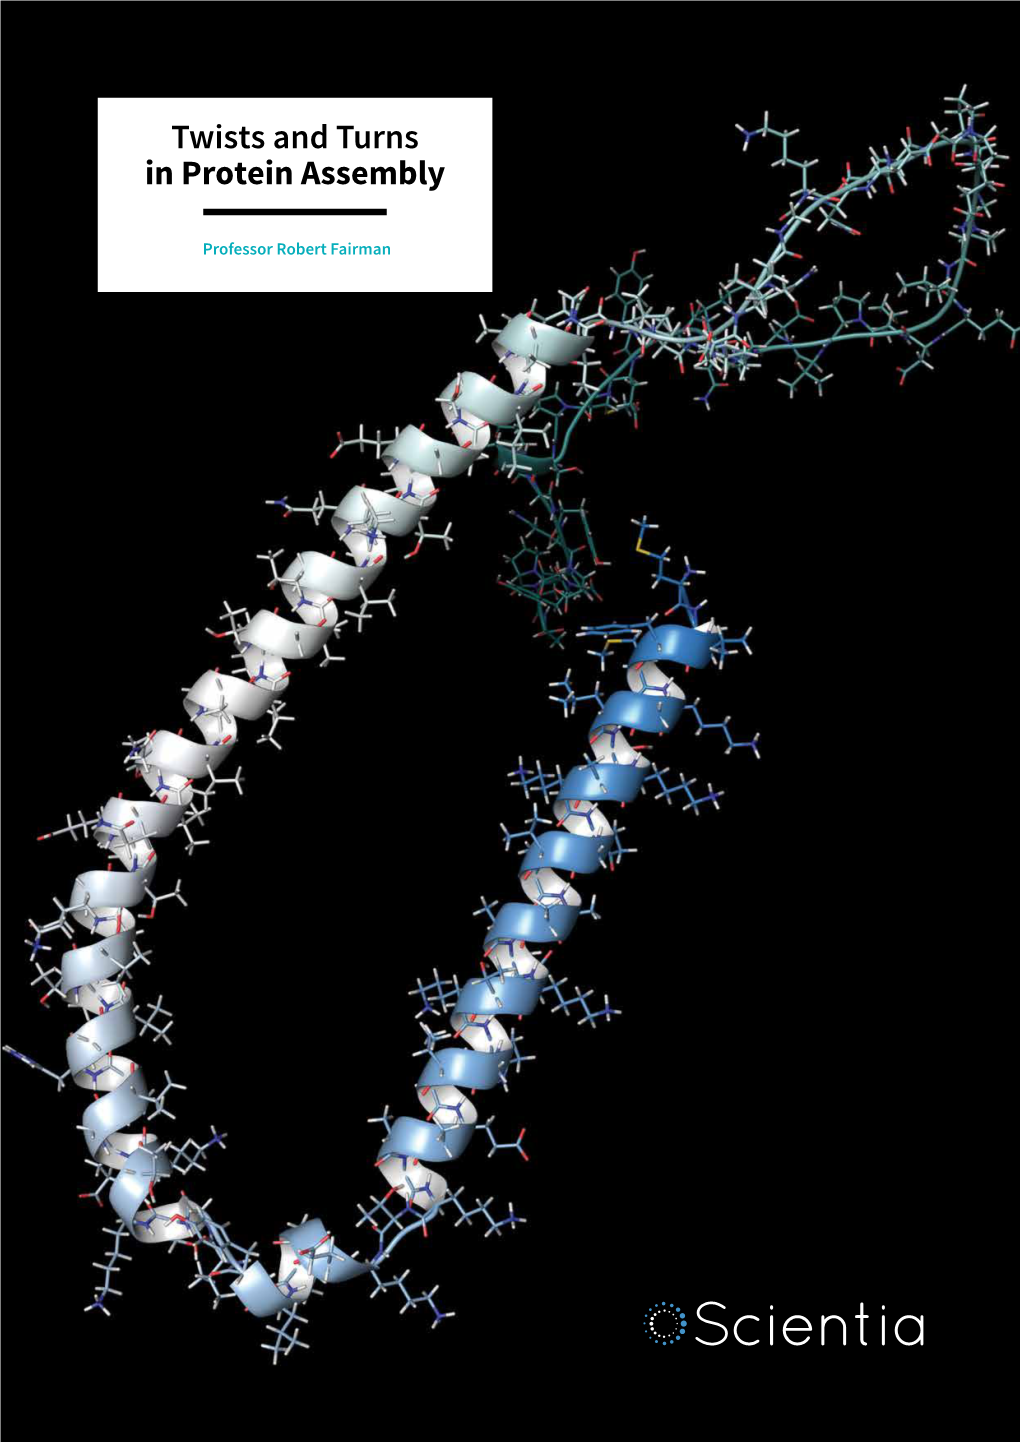 Twists and Turns in Protein Assembly